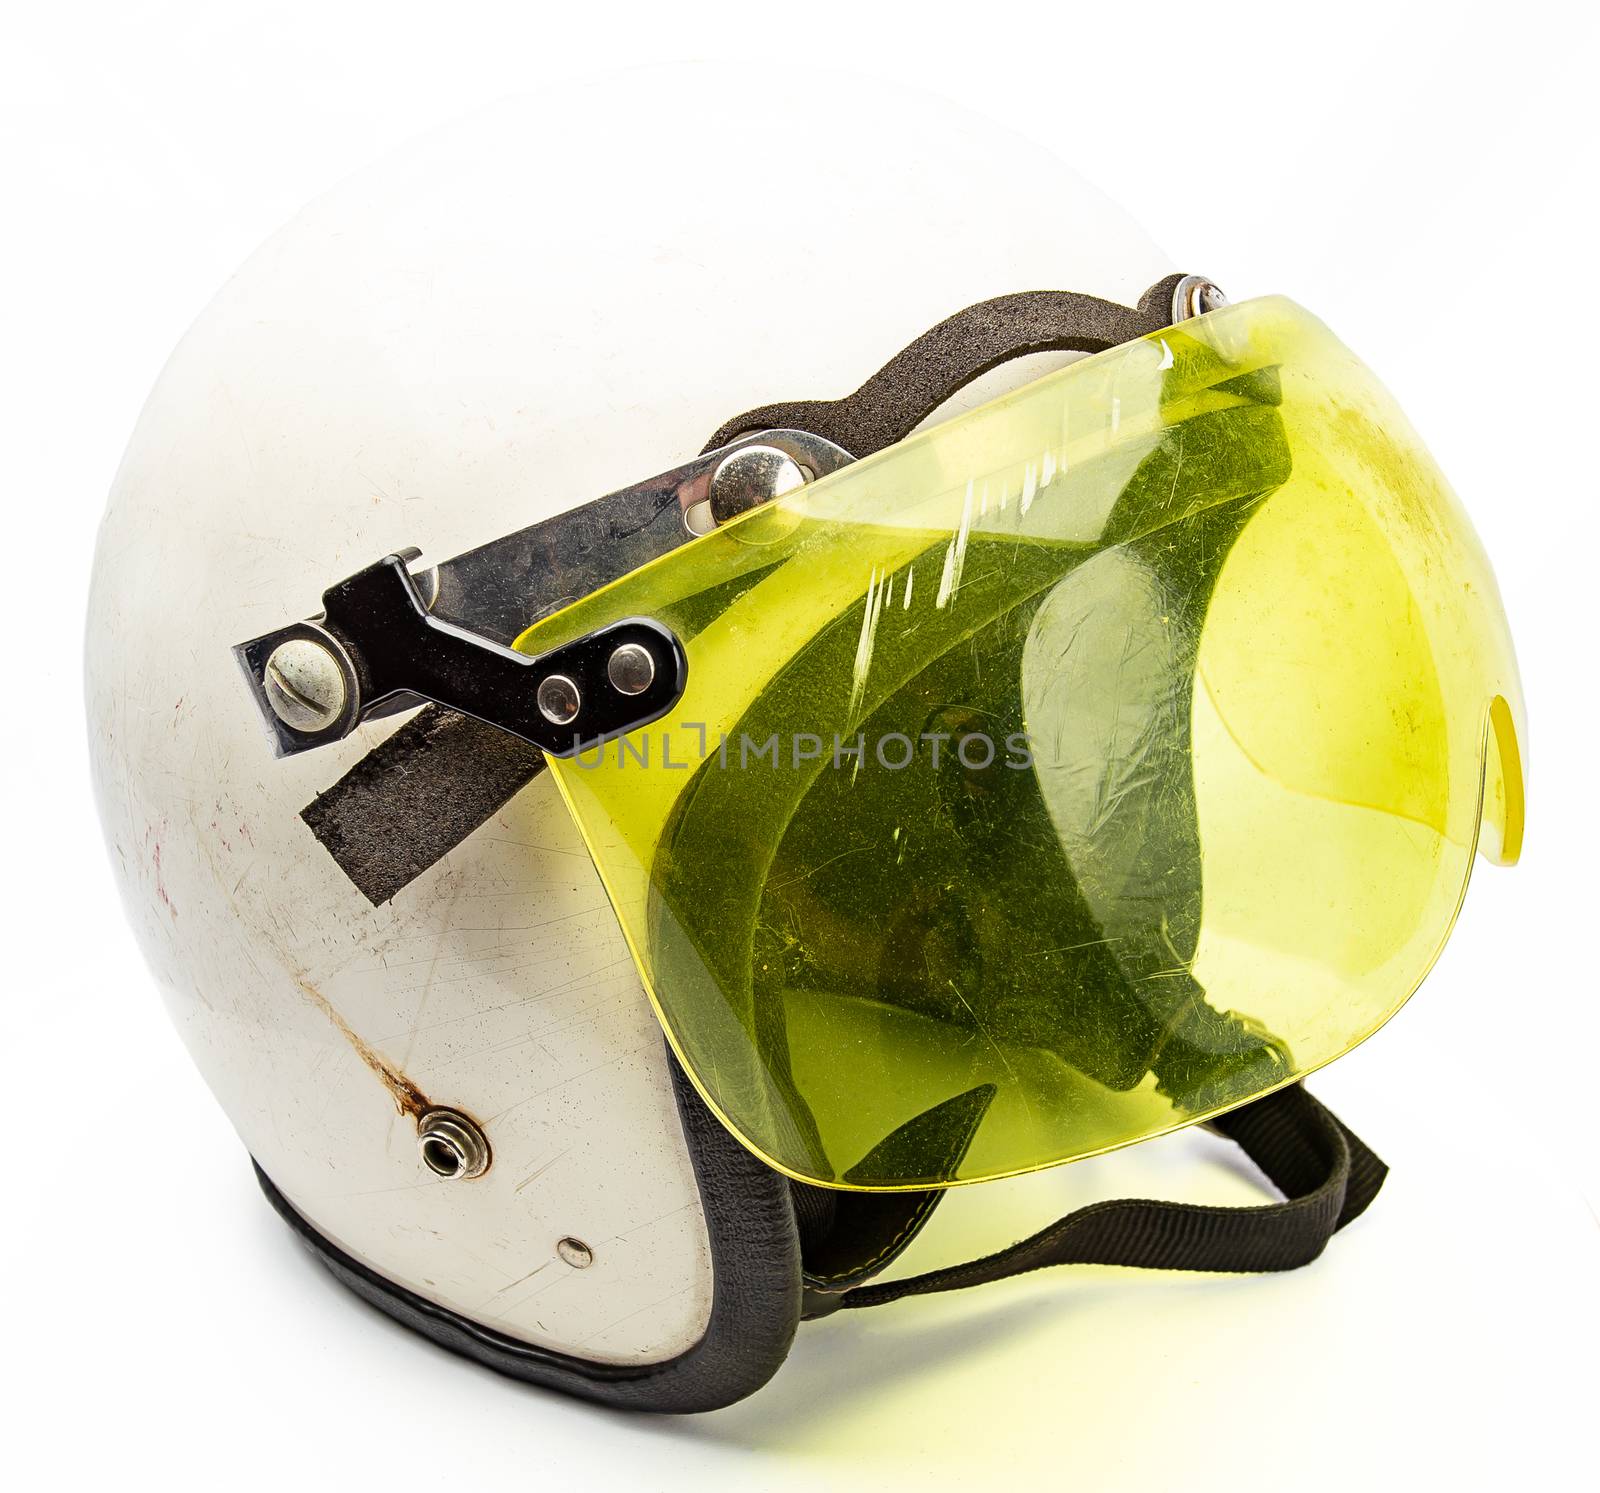 Old white snowmobile helmet with yellow visor